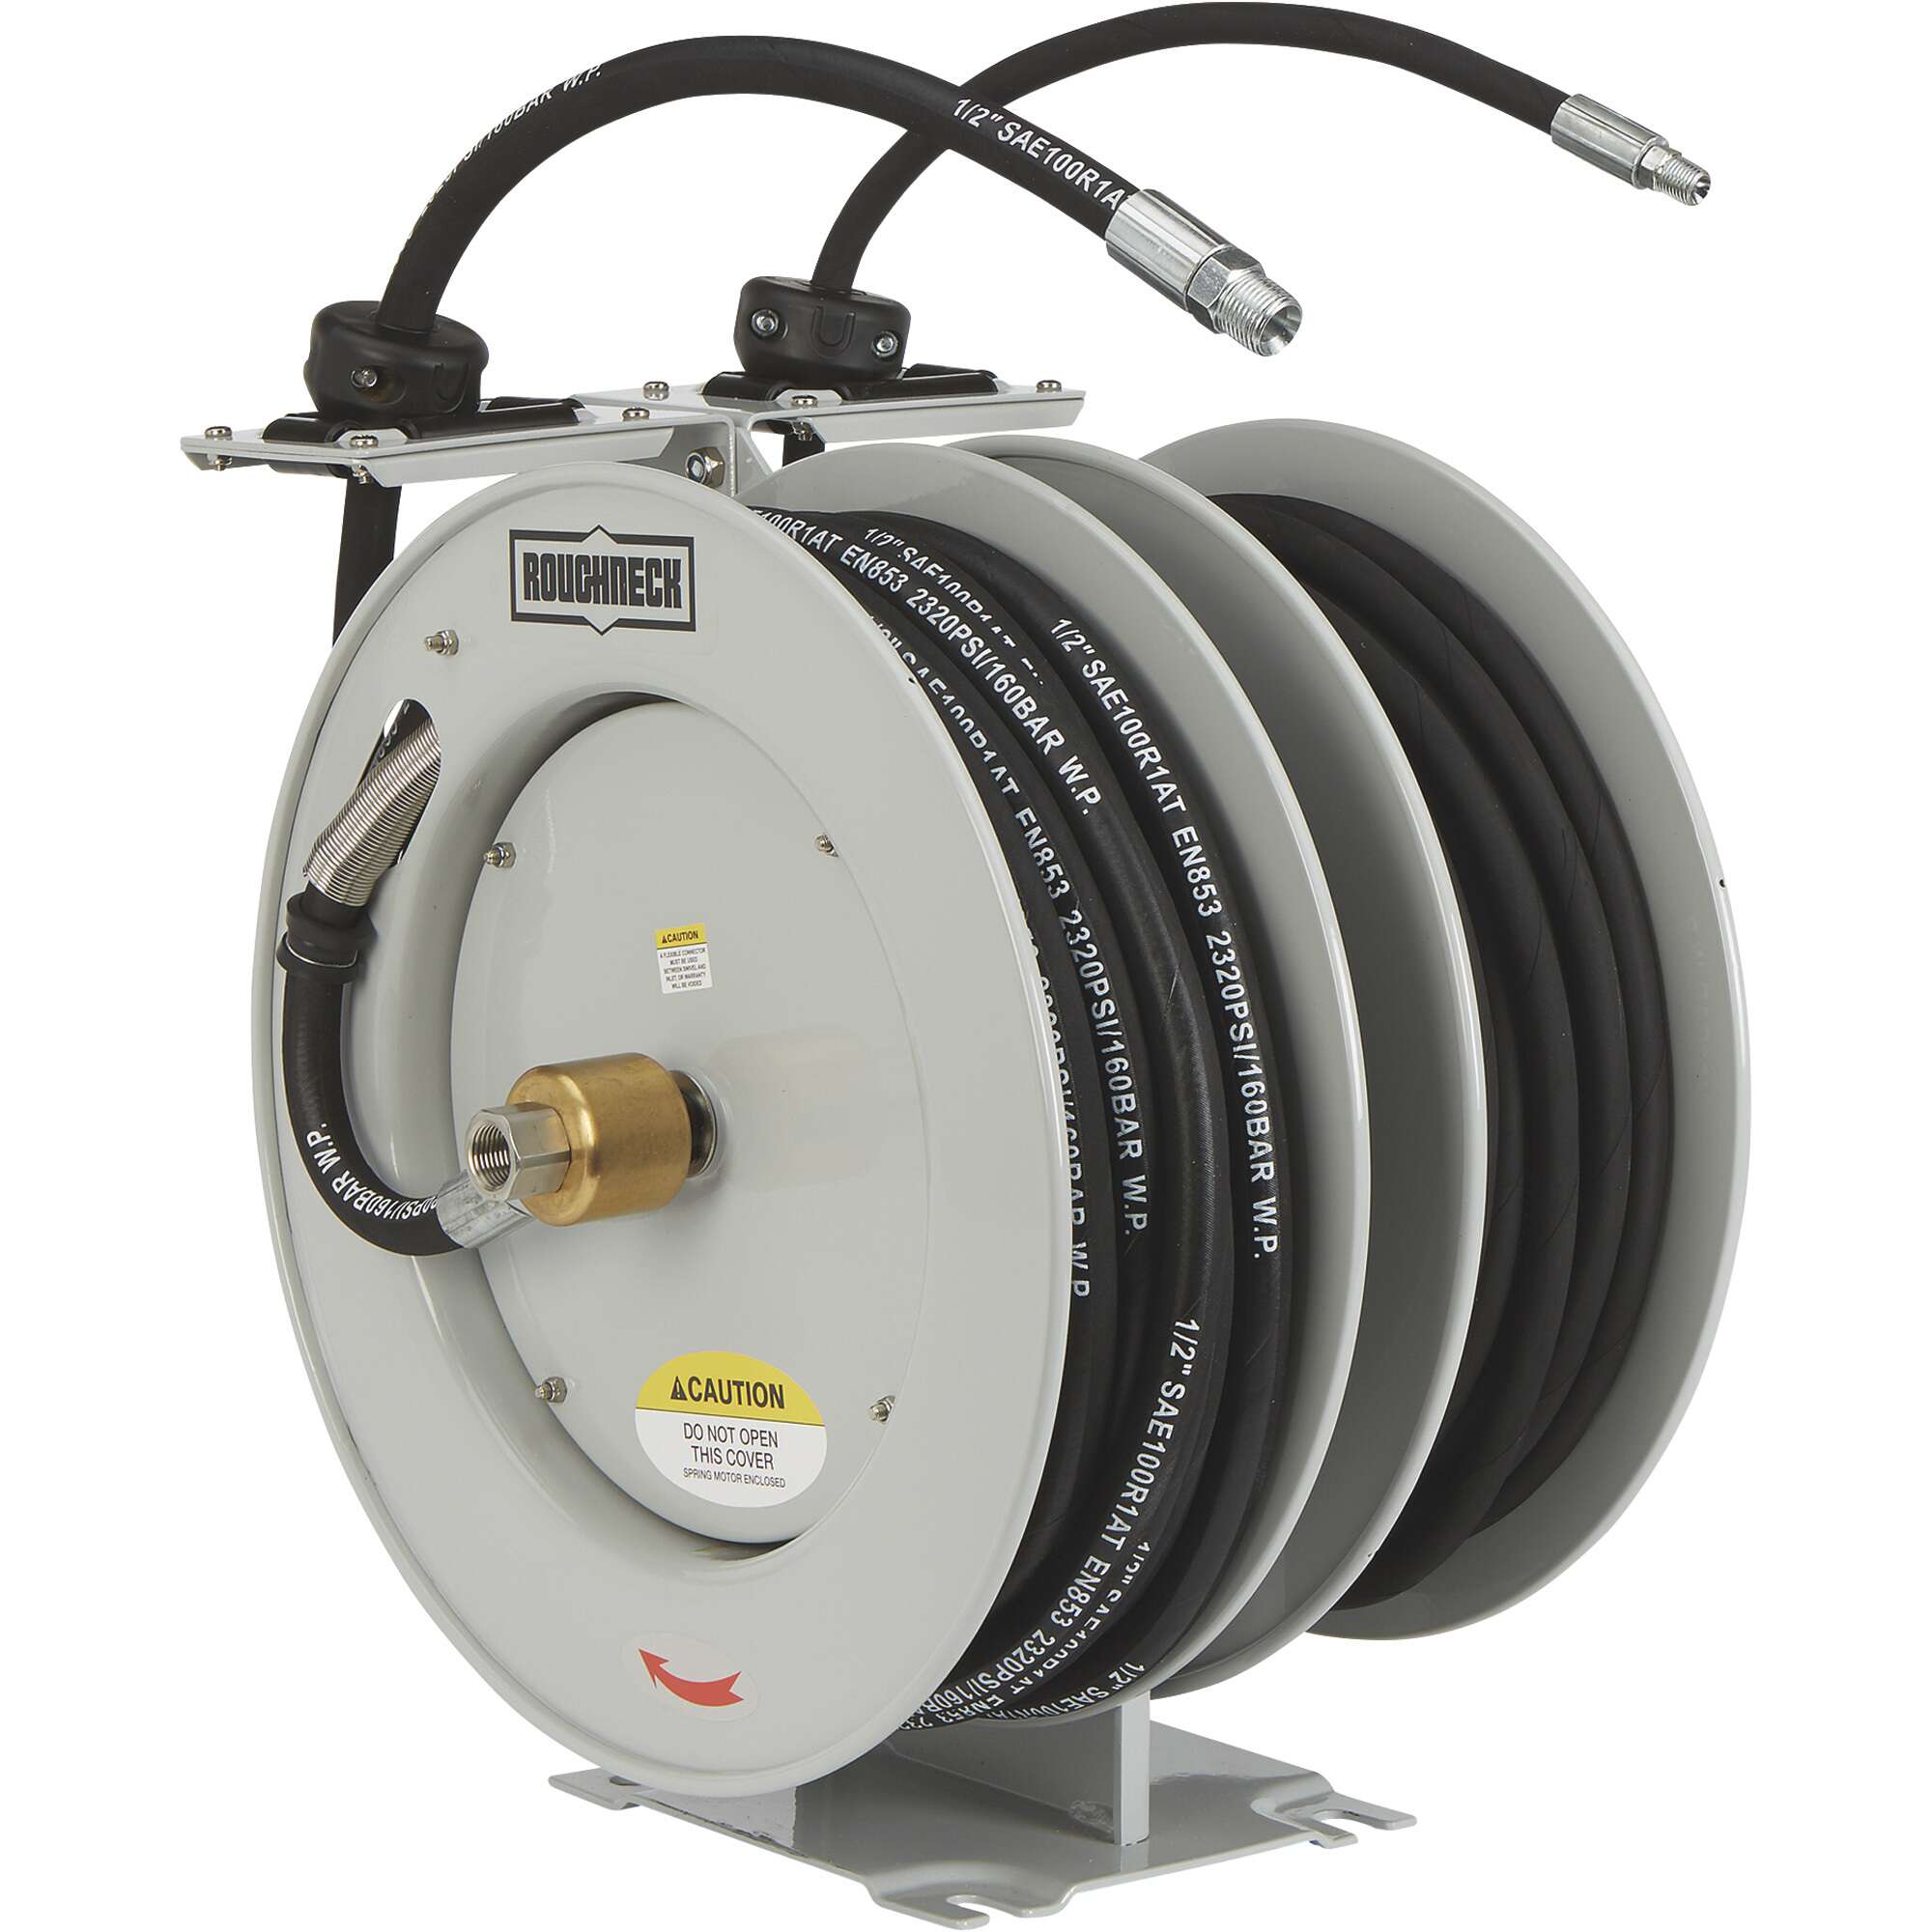 Roughneck Dual Grease Oil Hose Reel with 50ft Hoses 1/4in x 50ft